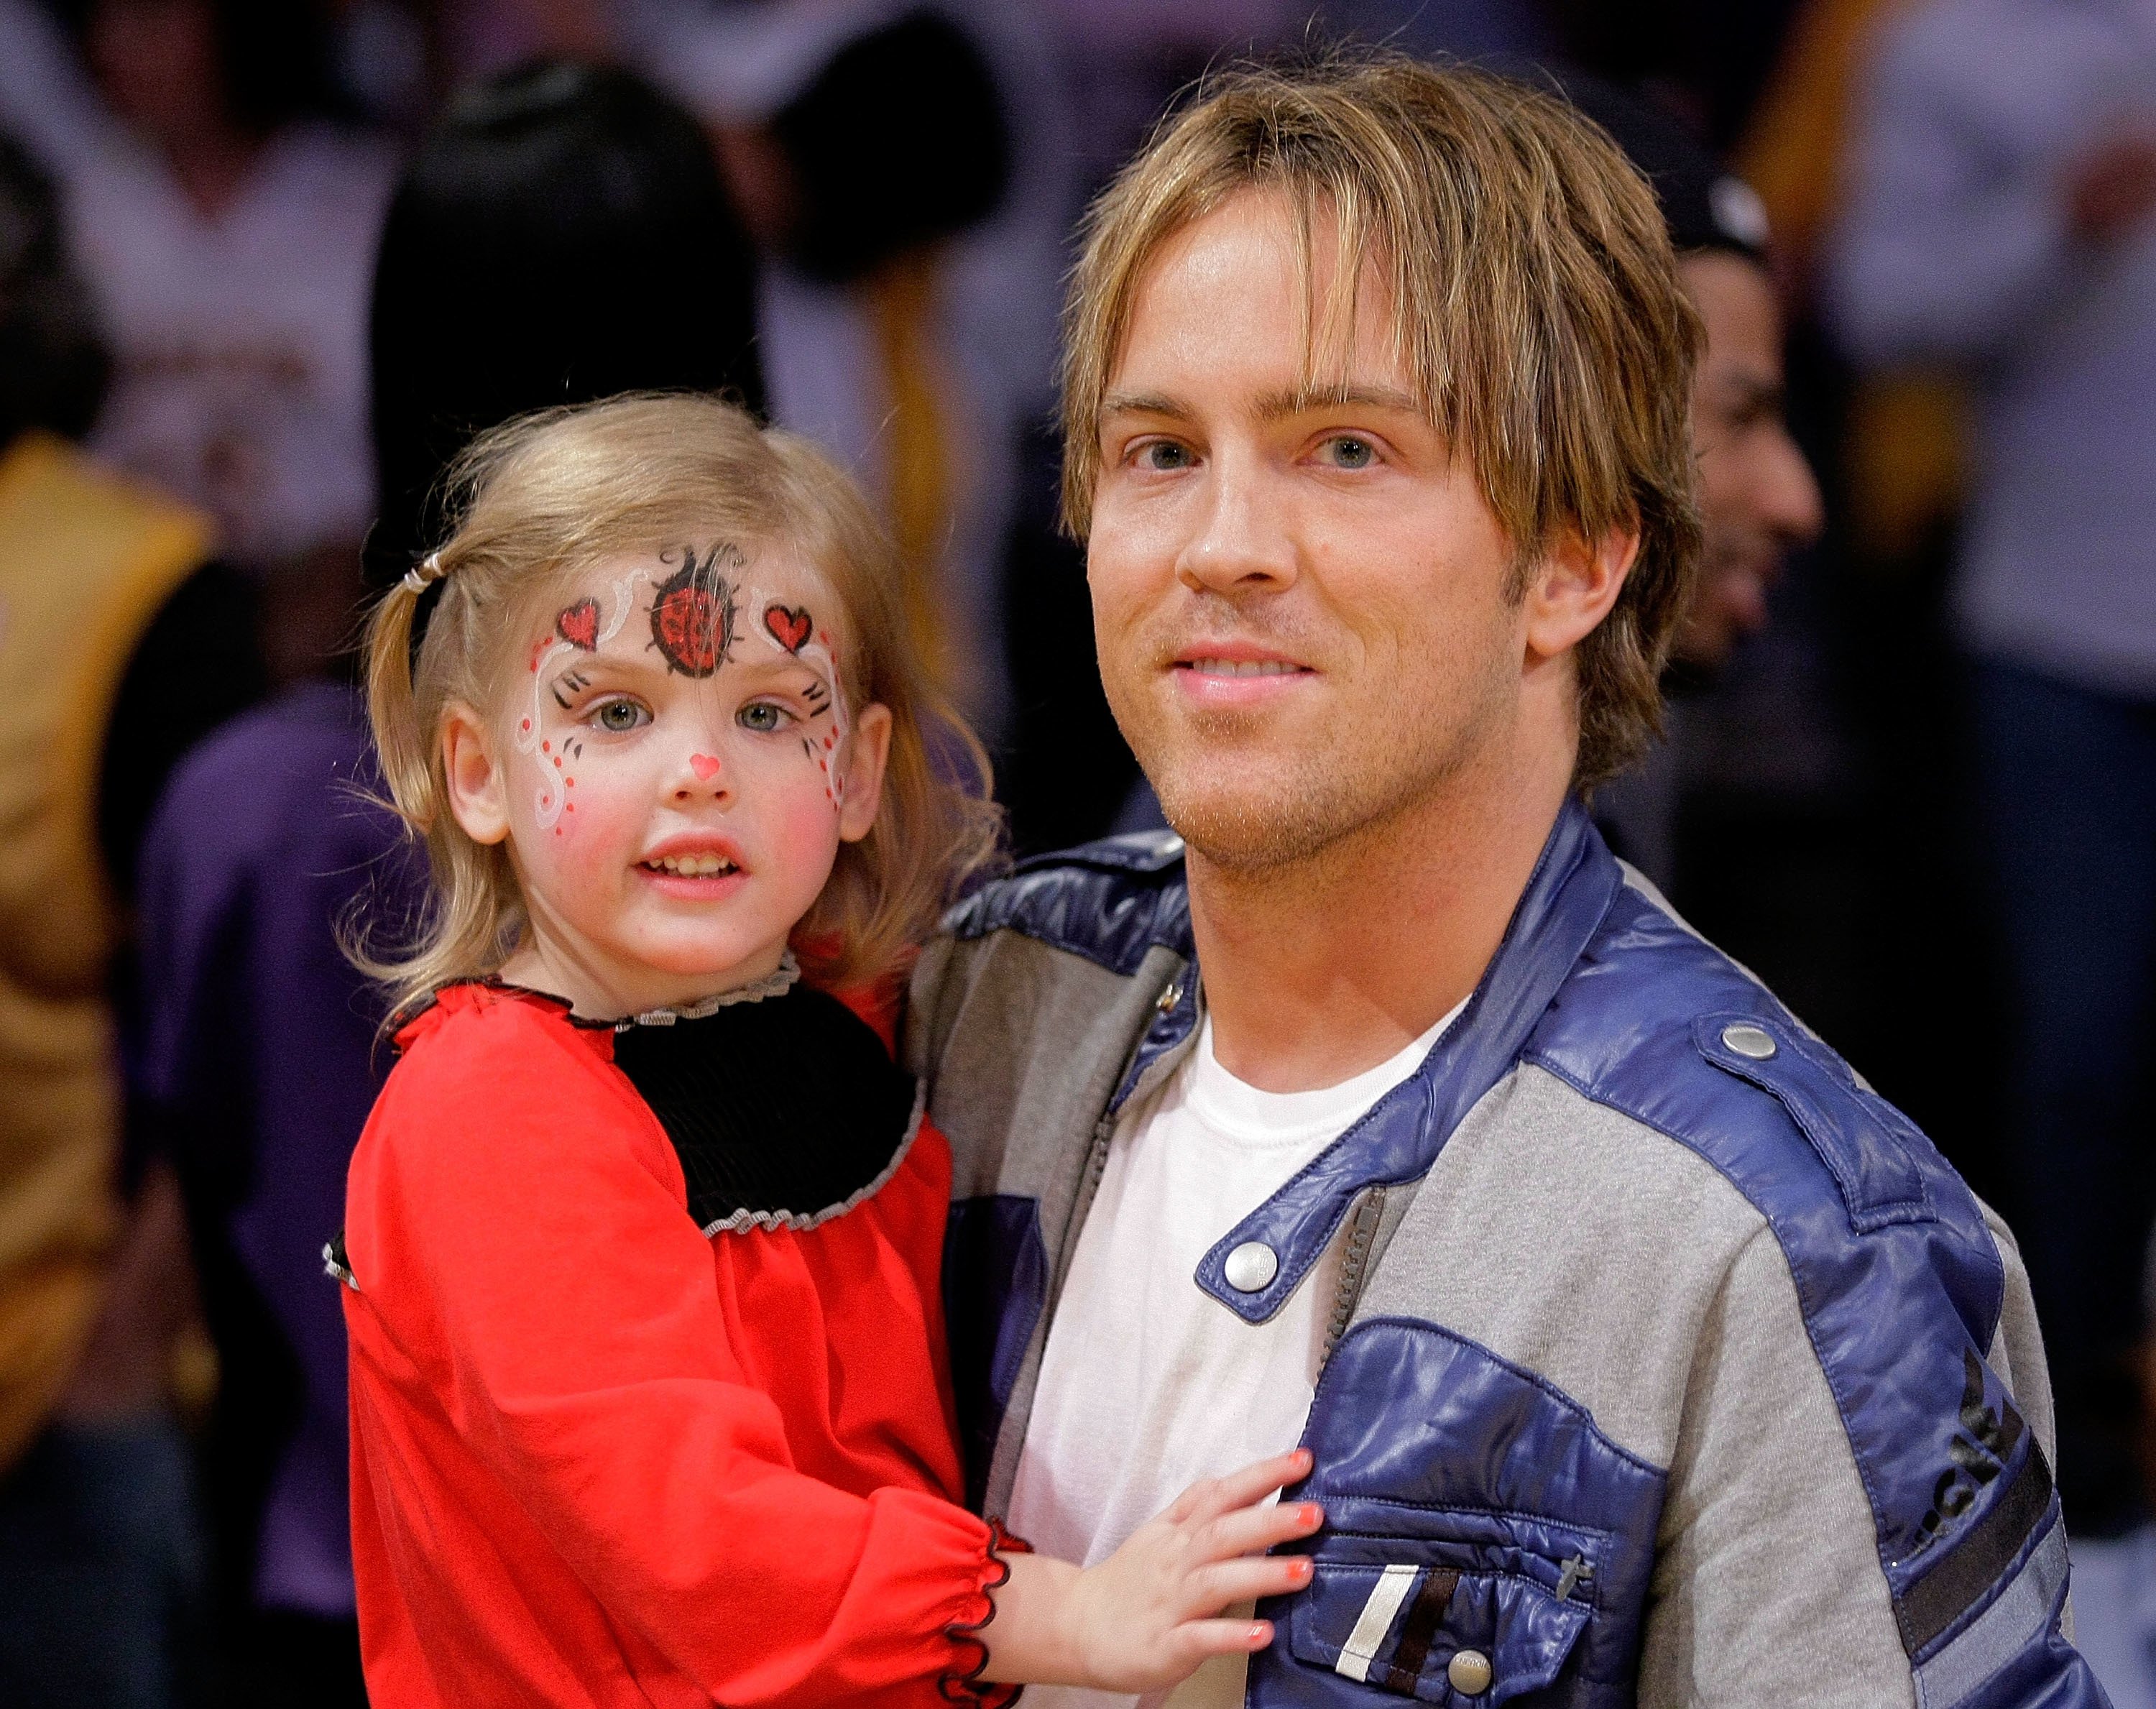  Larry Birkhead and his daughter Dannielynn Birkhead at a game on November 8, 2009 in Los Angeles, California. | Photo: Getty Images